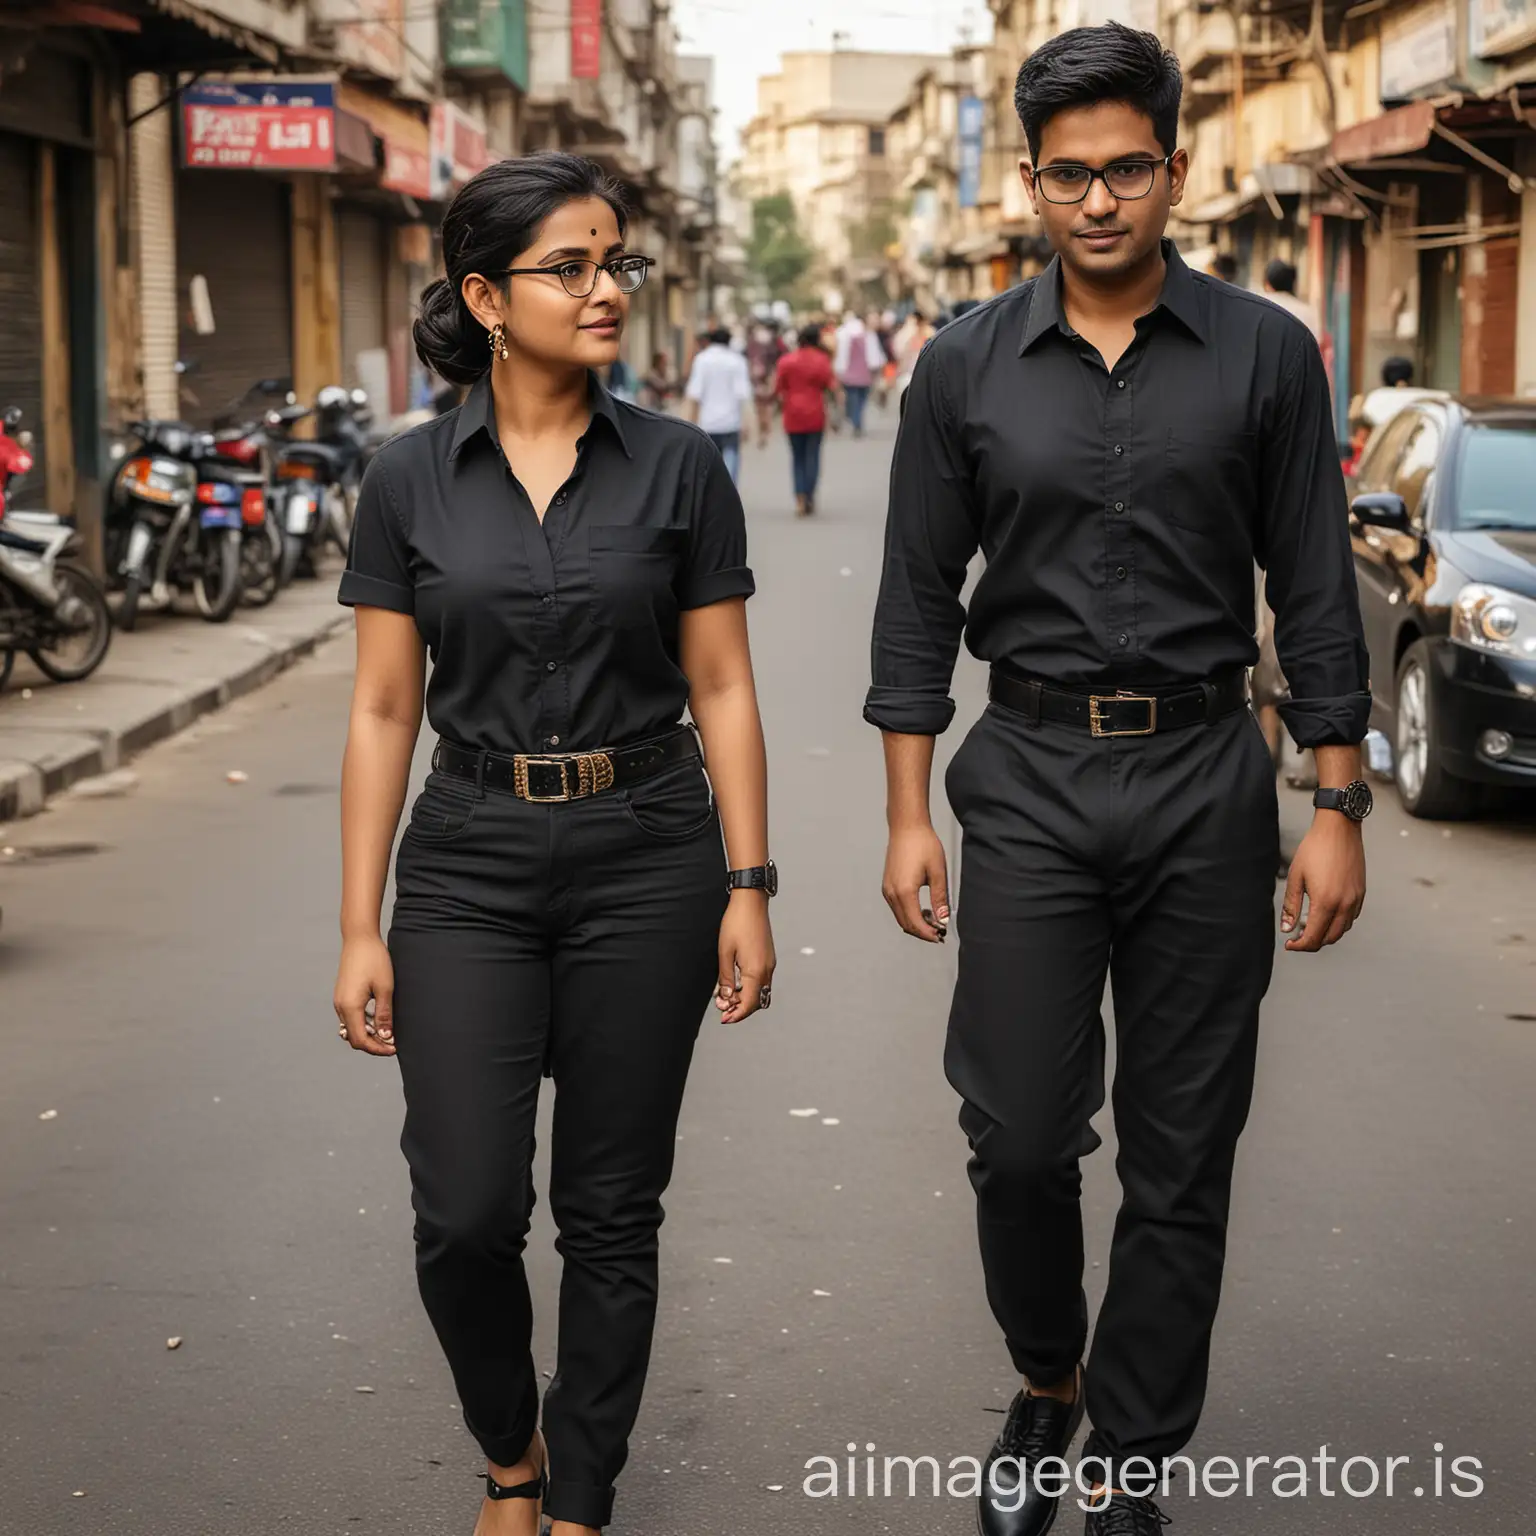 Young-Indian-Couple-Walking-in-Matching-Black-Outfits-Urban-Street-Scene-Photography